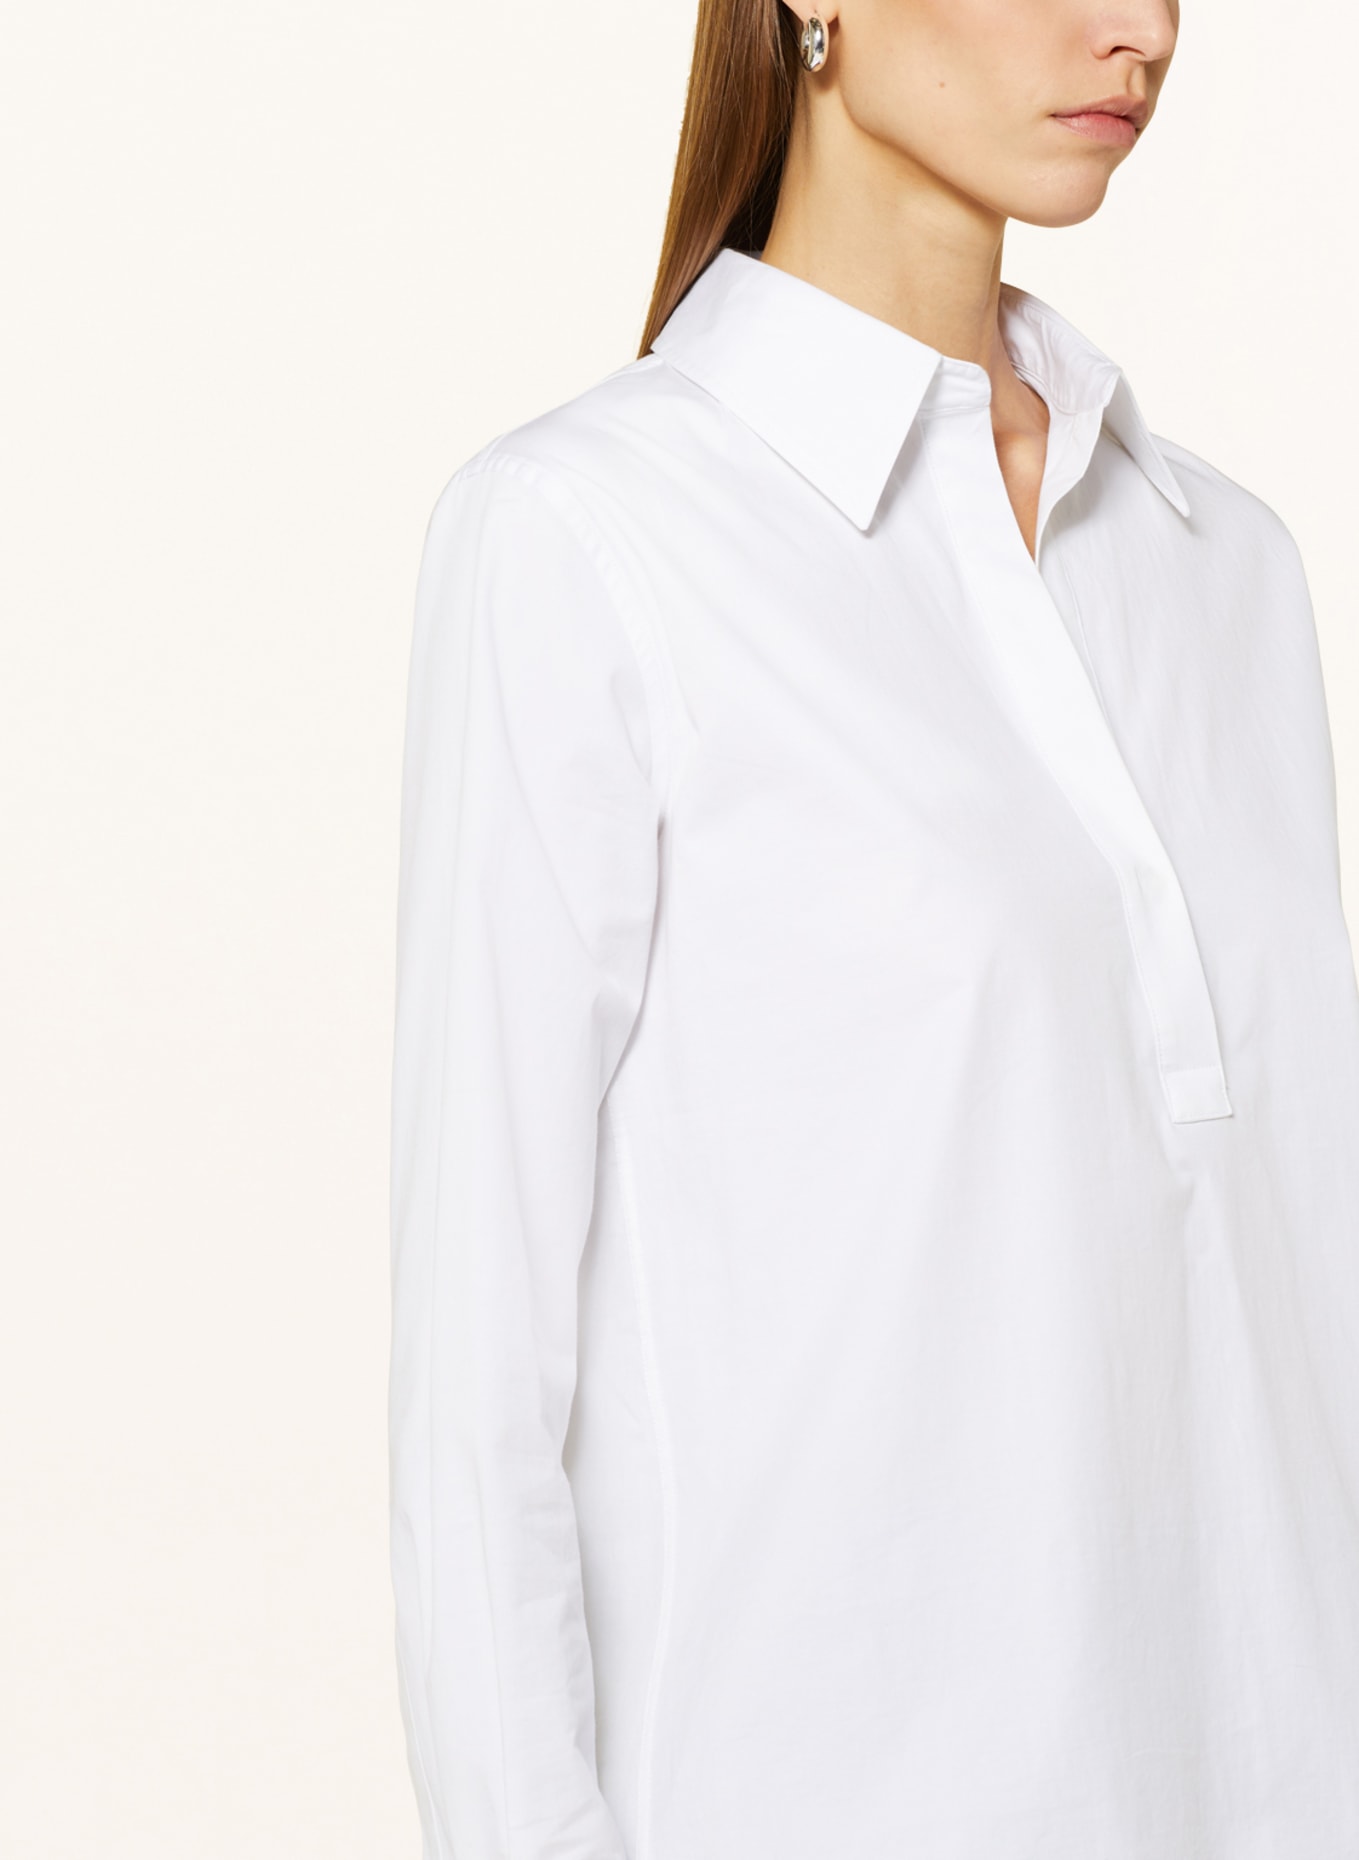 CLOSED Shirt blouse, Color: WHITE (Image 4)